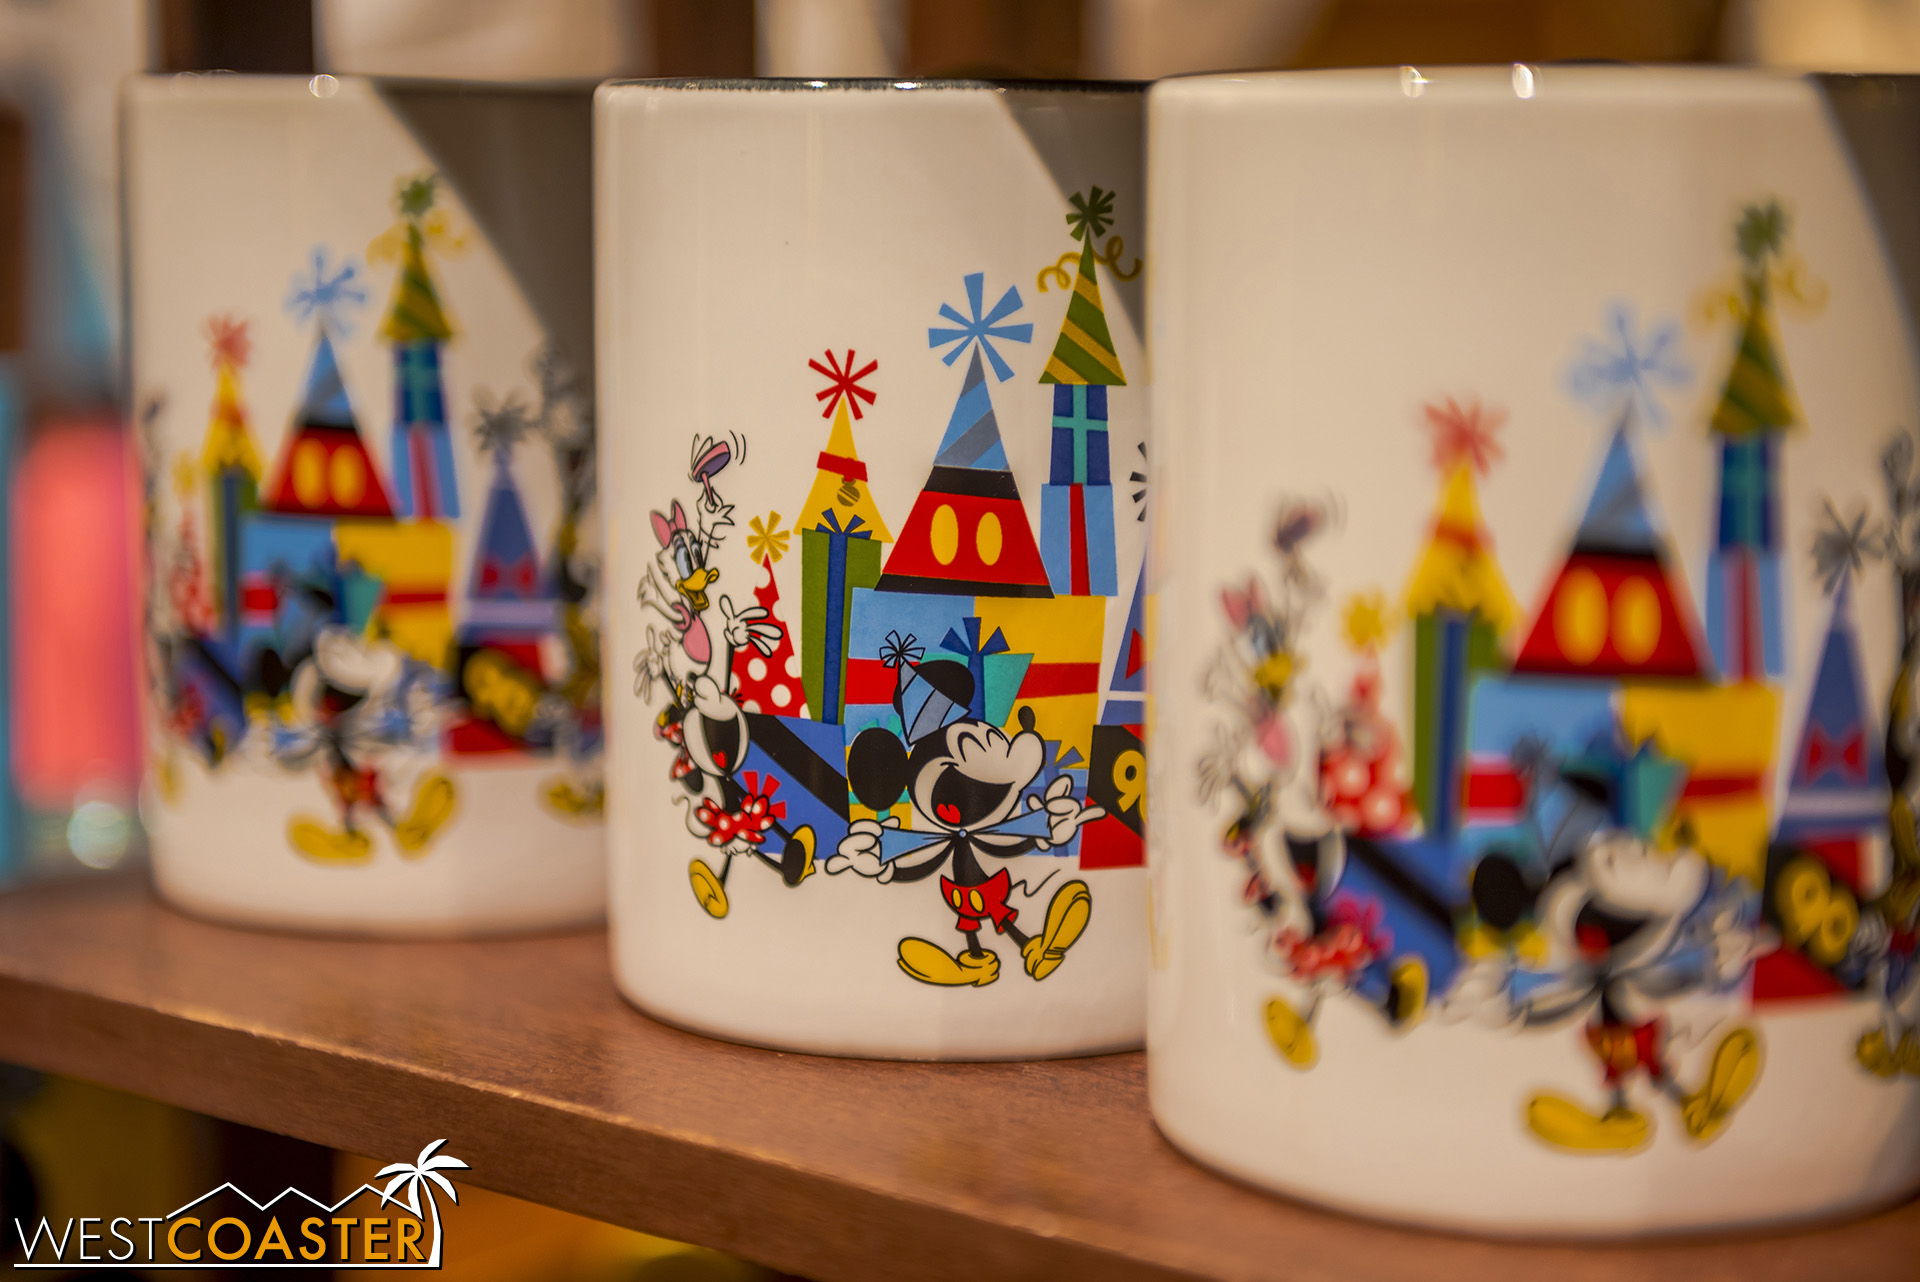  I like the colors and design on the mugs. 